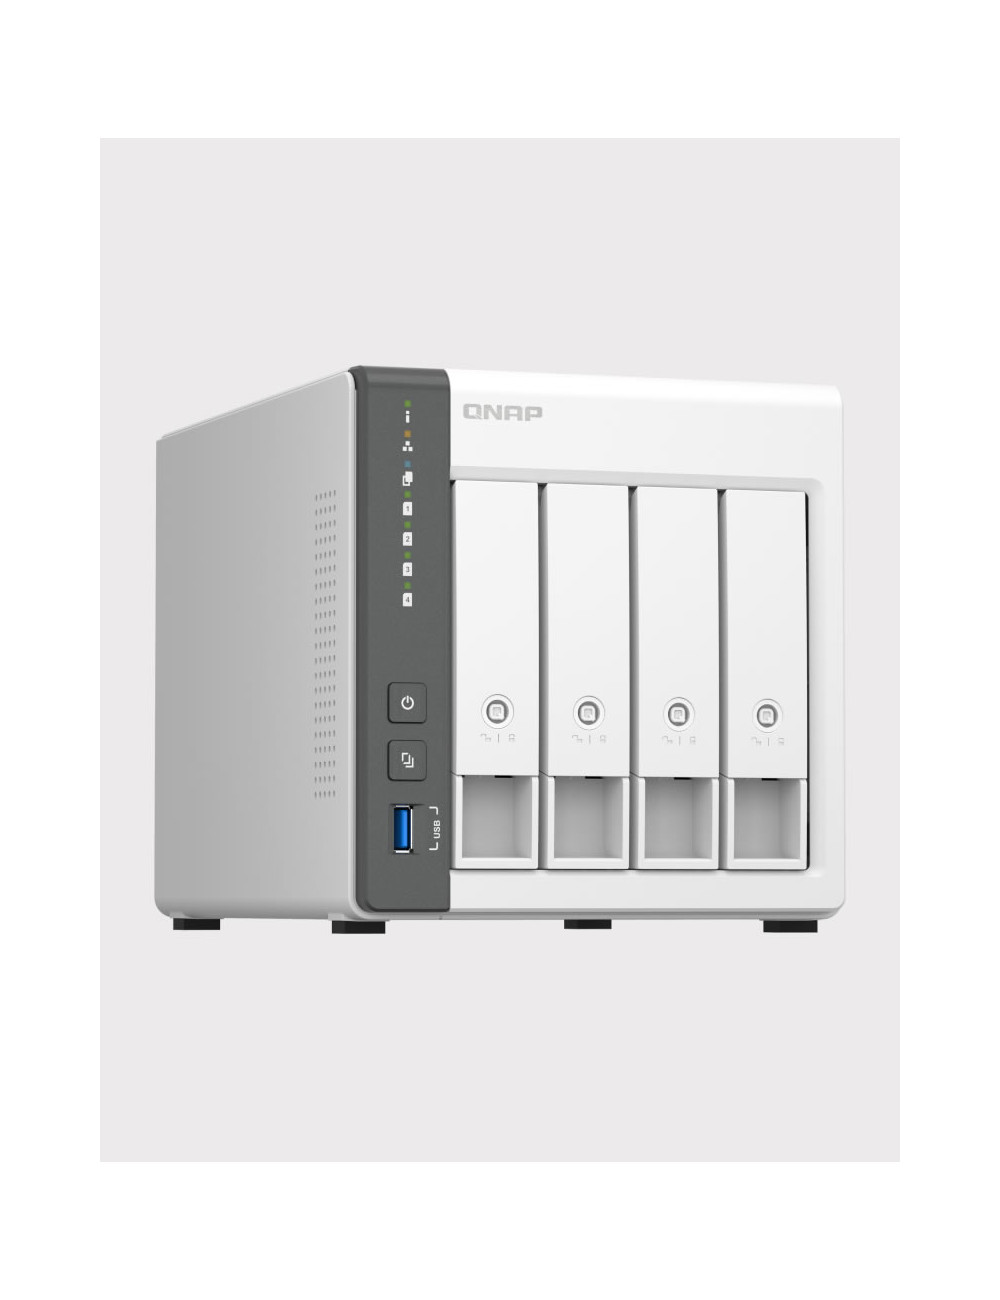 Synology DS418 Servidor NAS (Sin discos)